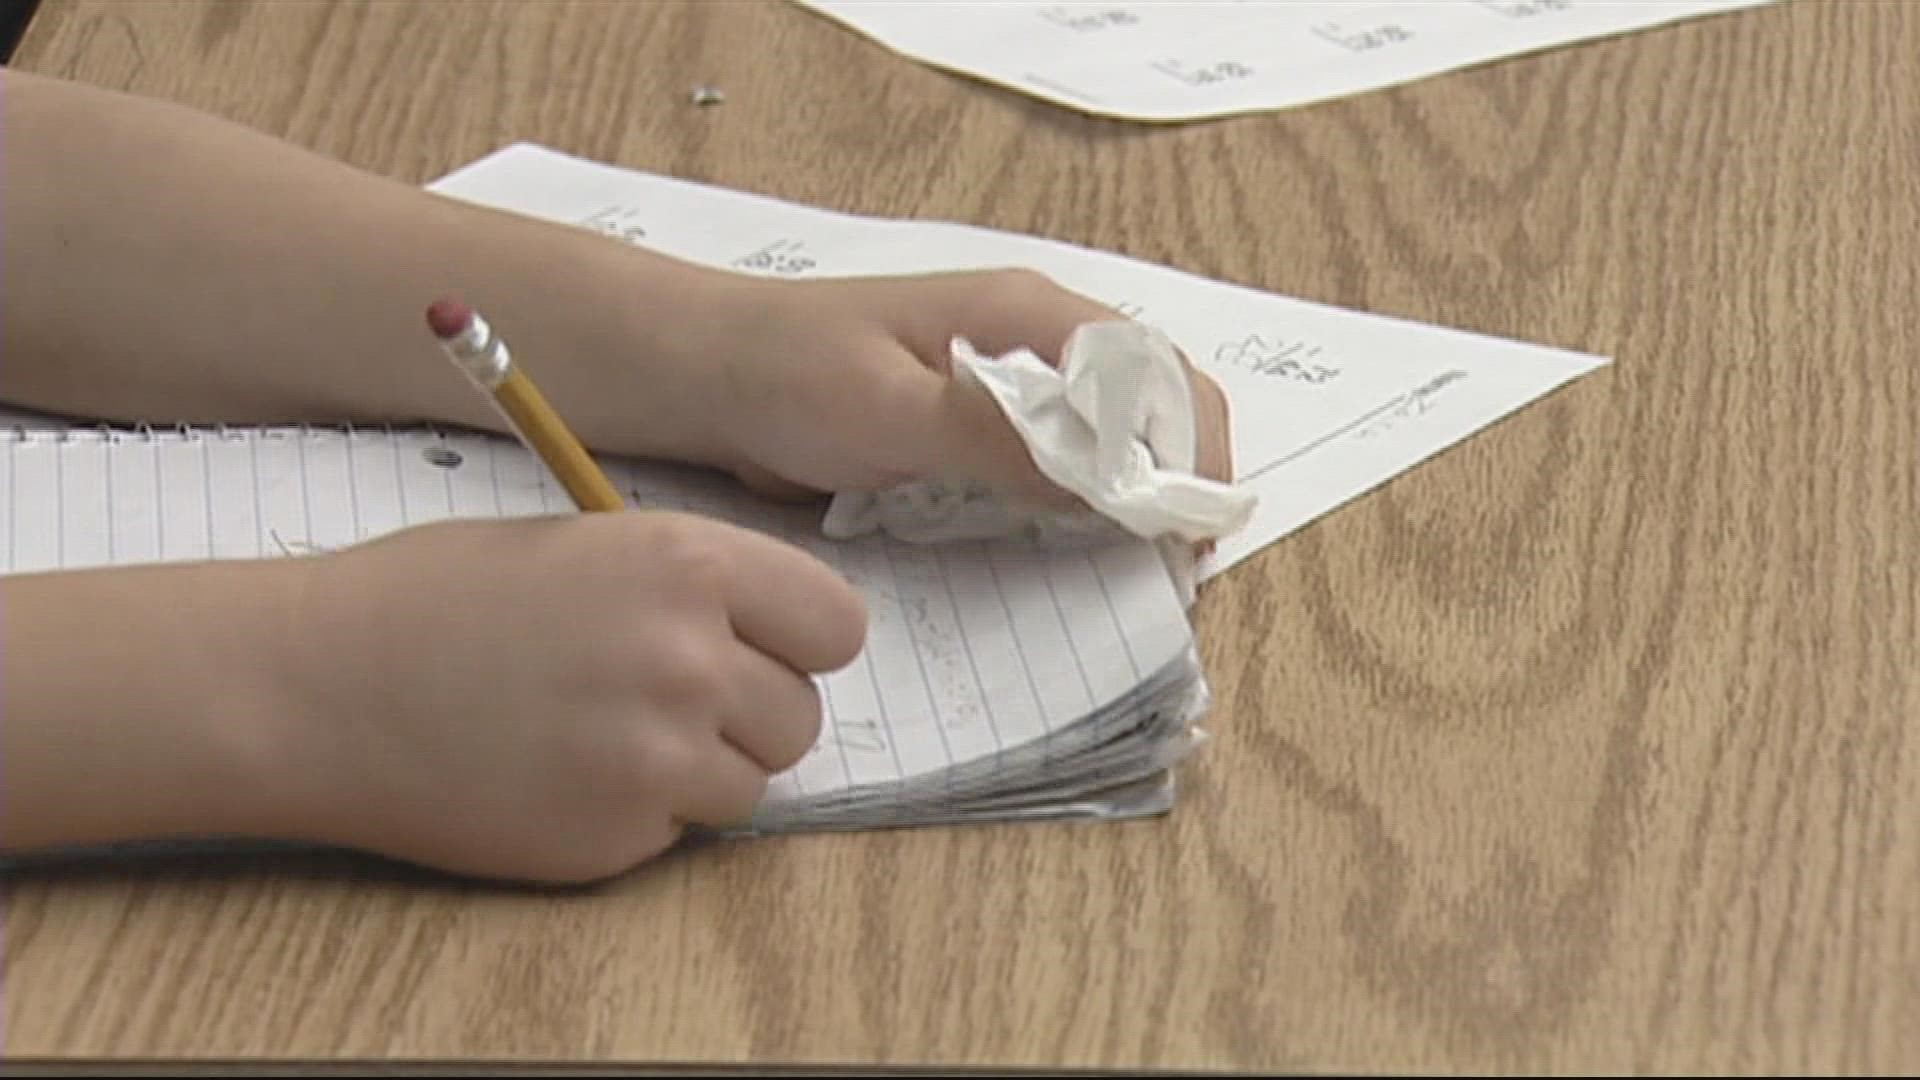 Teachers are leaving the profession, saying they’re overworked and underpaid. In part 2 of KGW’s series, educators offer short and long term solutions.